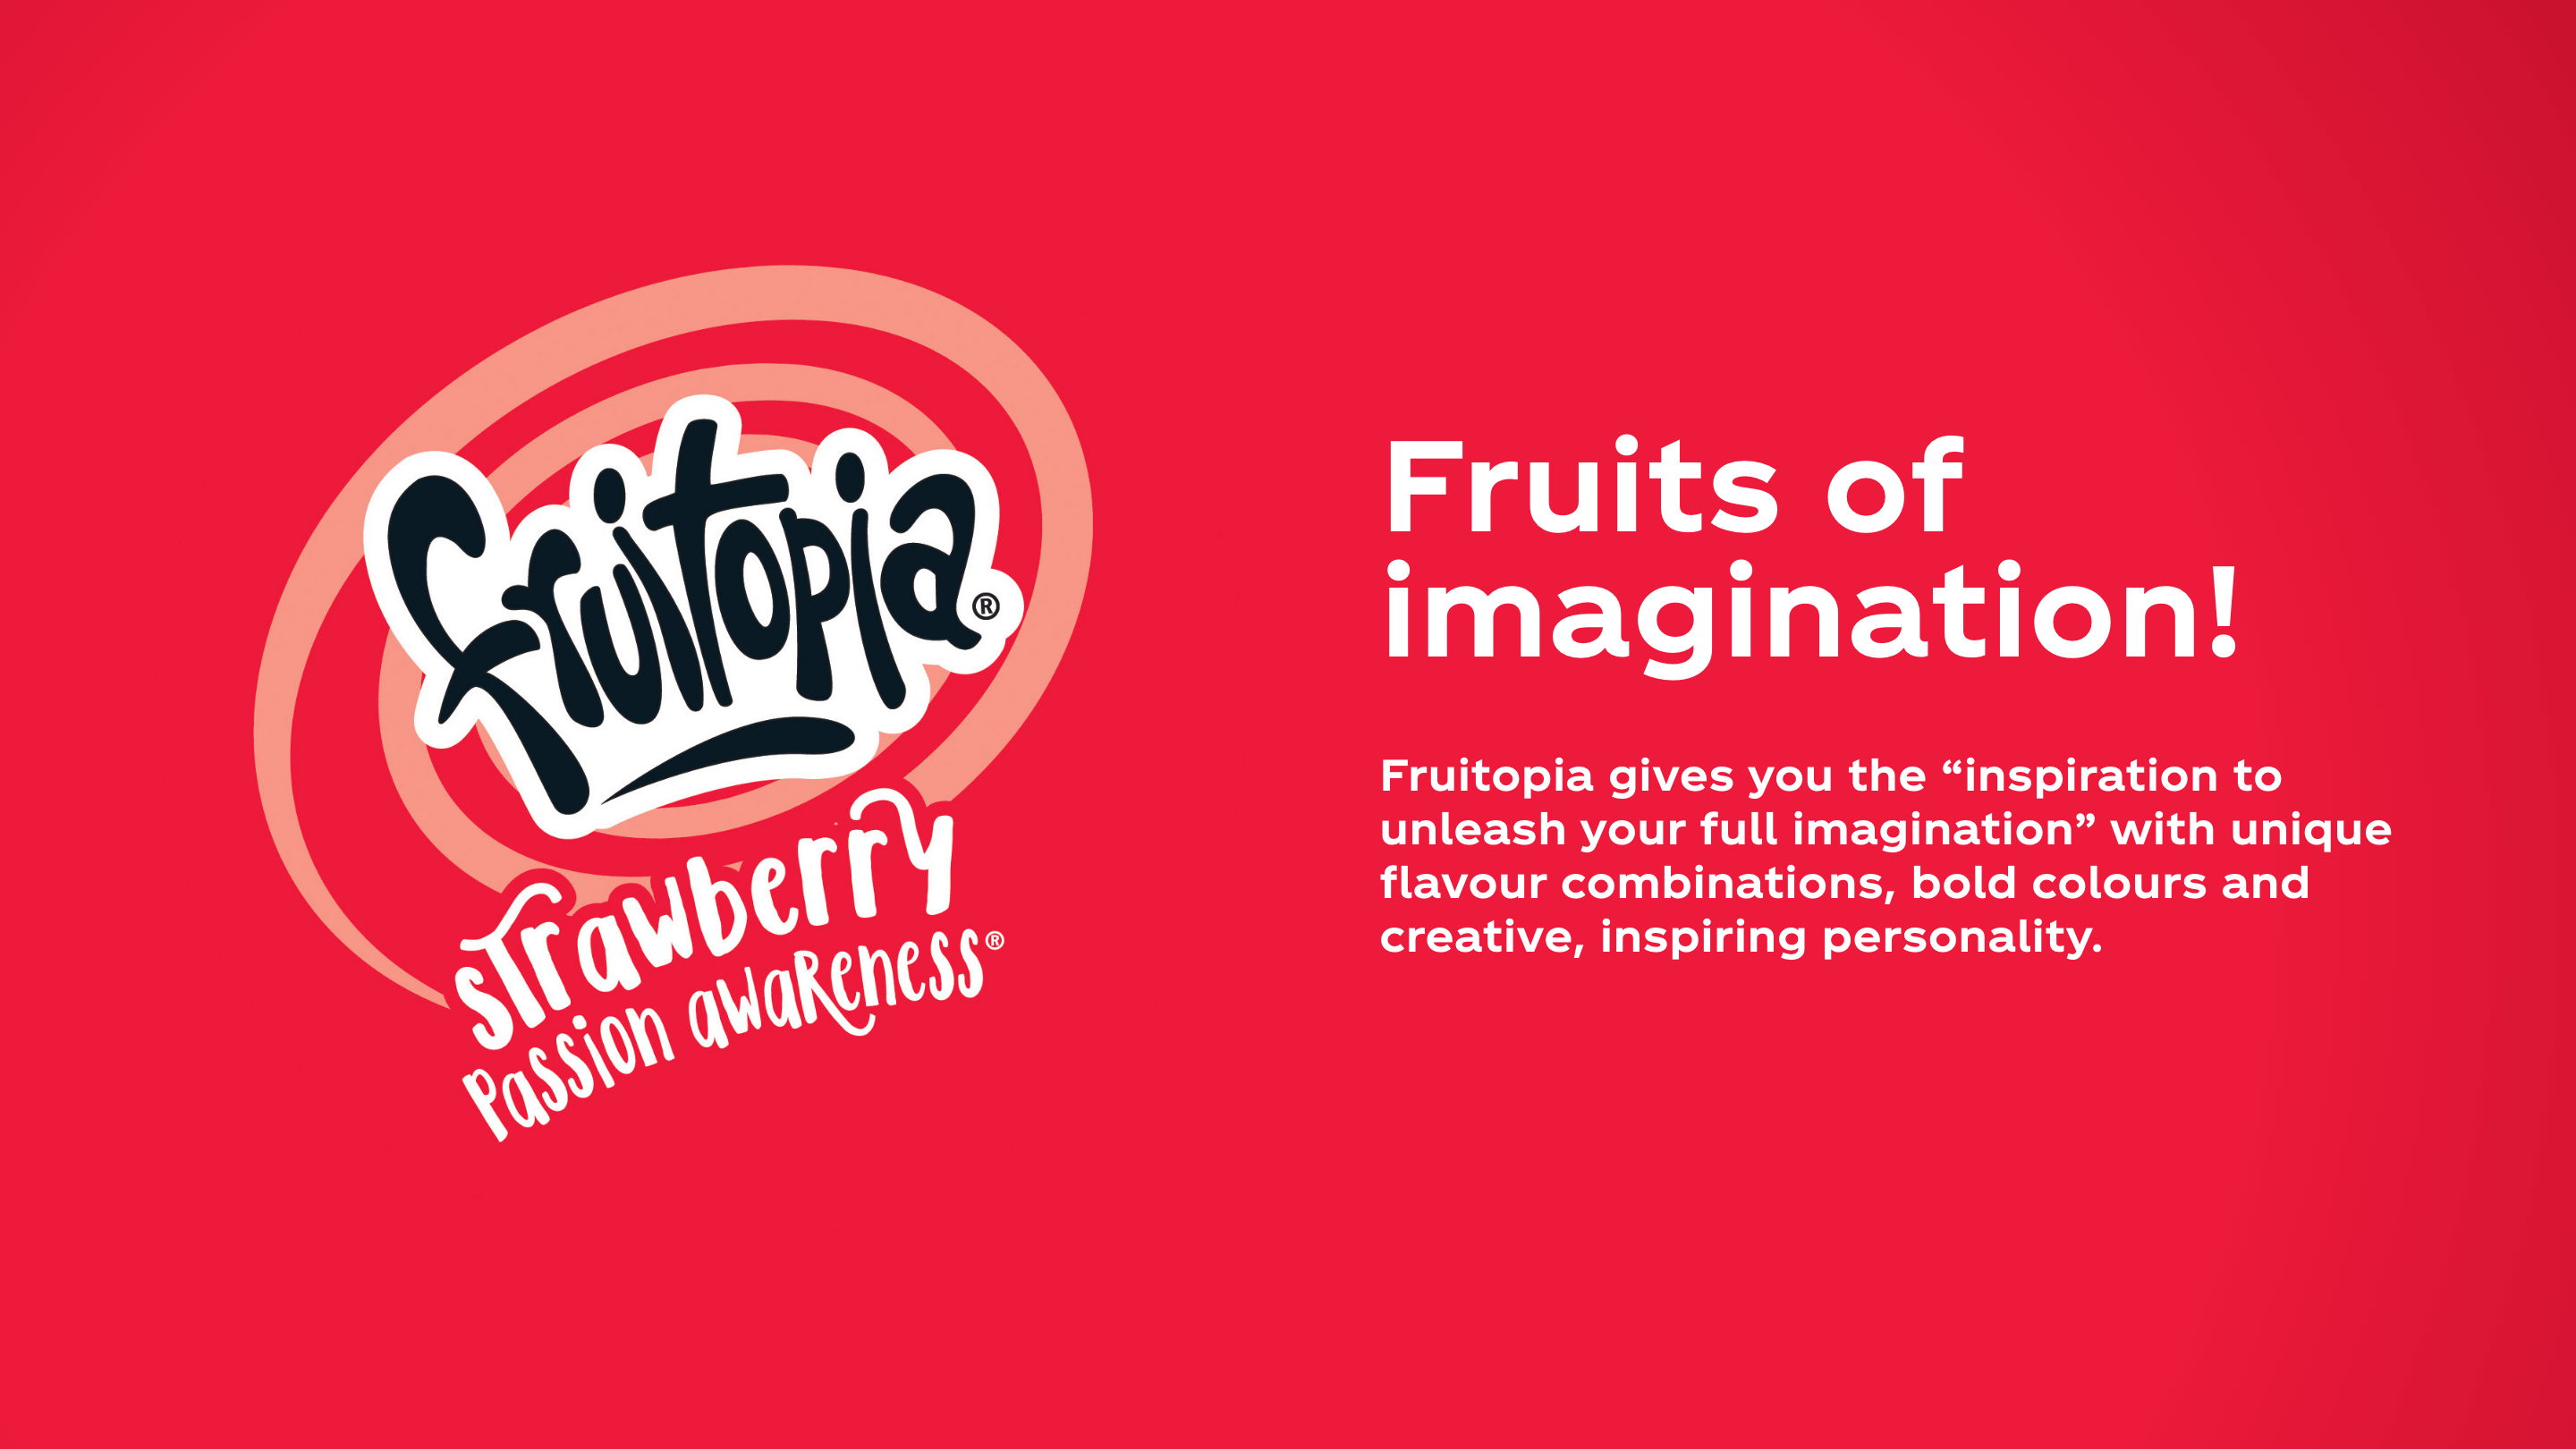 fruitopia. Fruits of imagination! Fruitopia gives you the "inspiration to unleash your full imagination" with unique flavour combinations, bold colours and creative, inspiring personality.